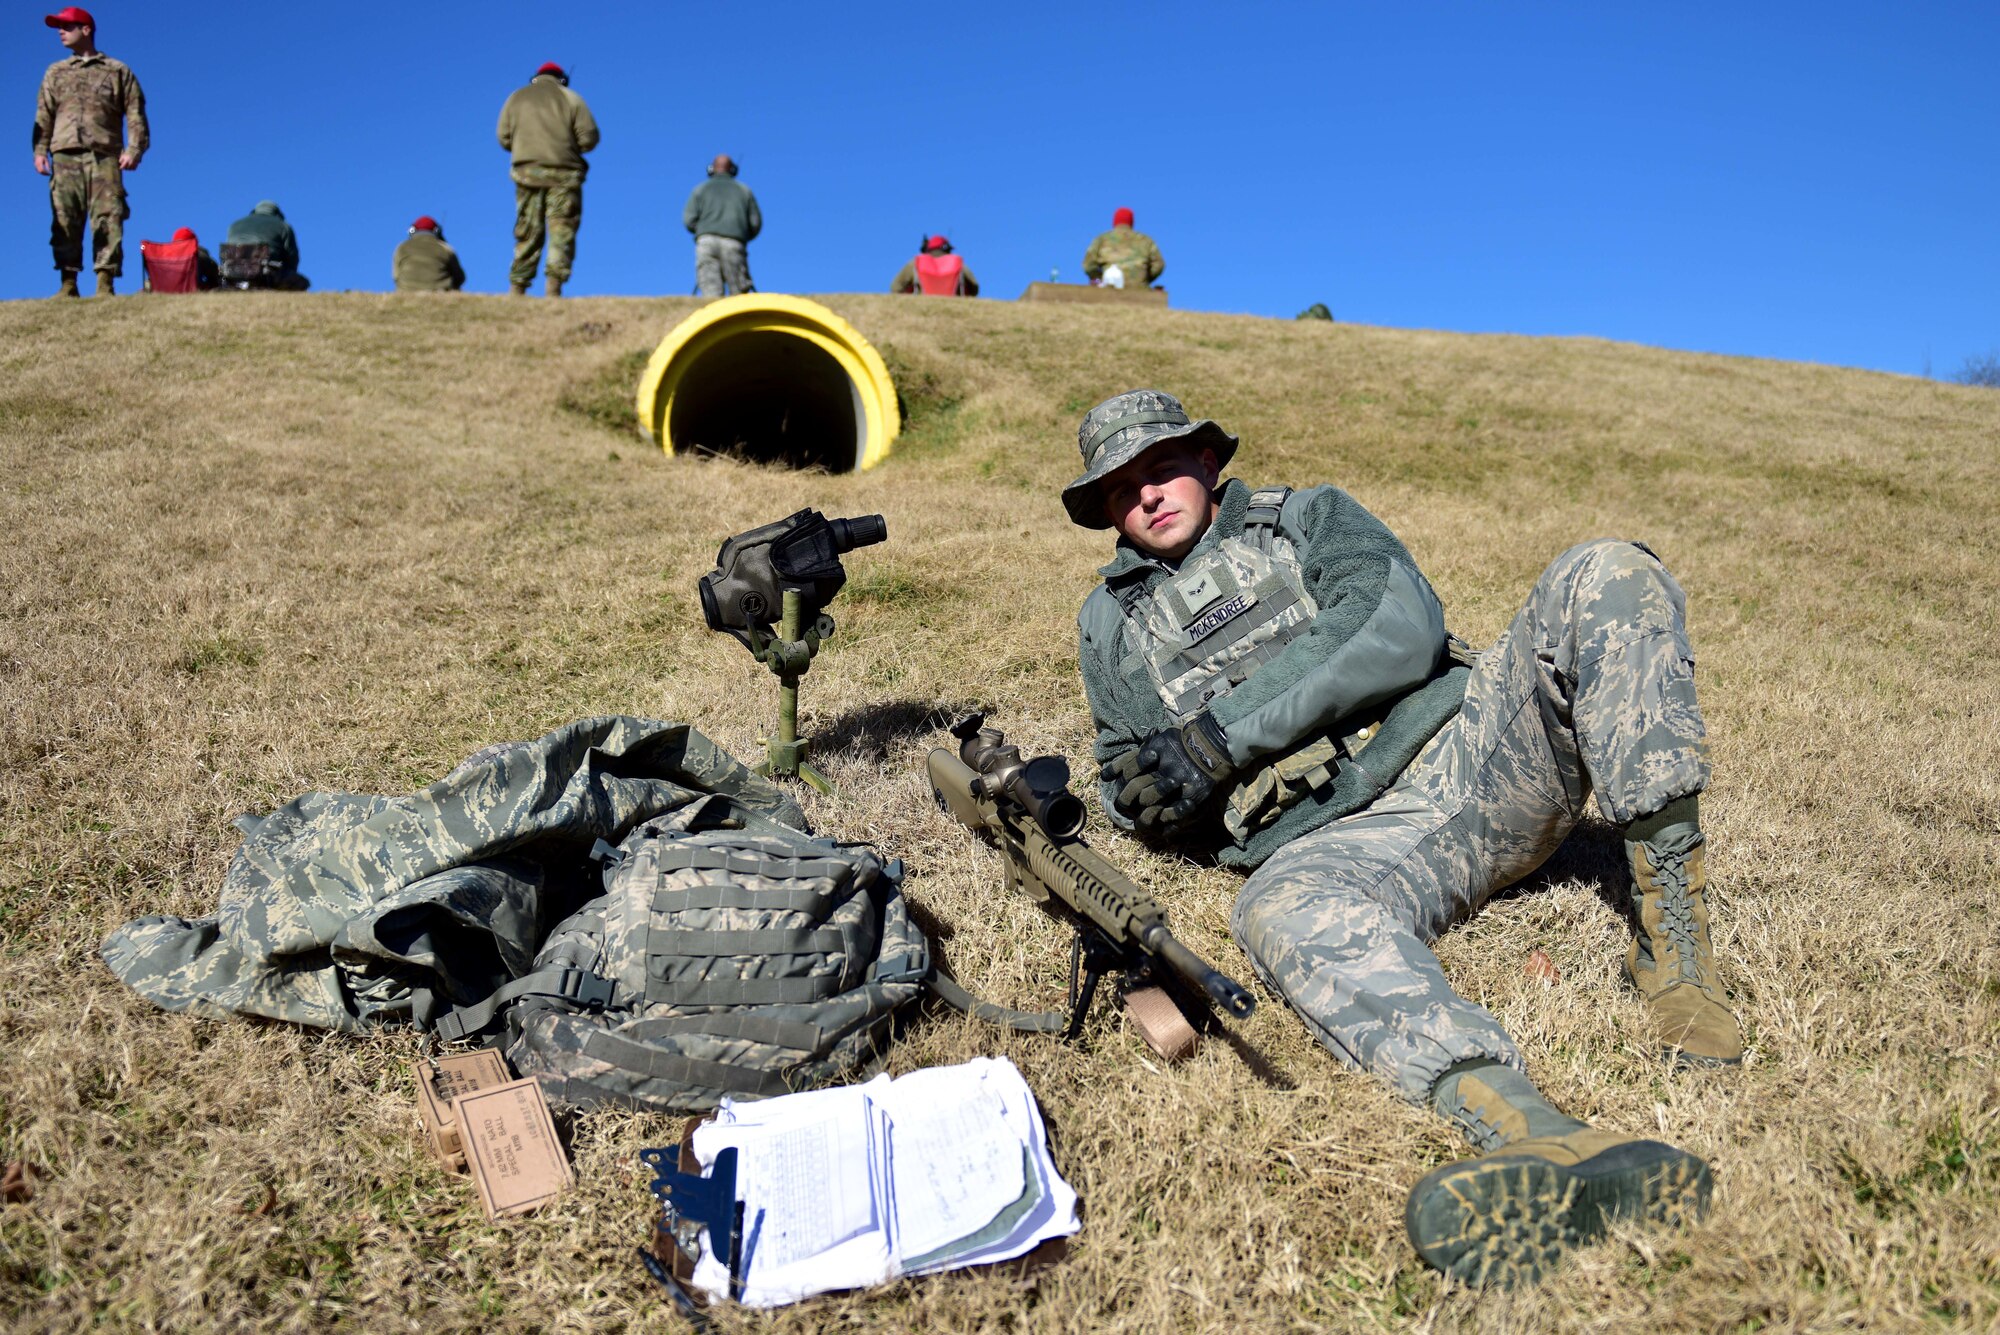 A man wearing the Airman Battle Uniform sits on a hill with a rifle, spotting scope, vest, backpack and clipboard.